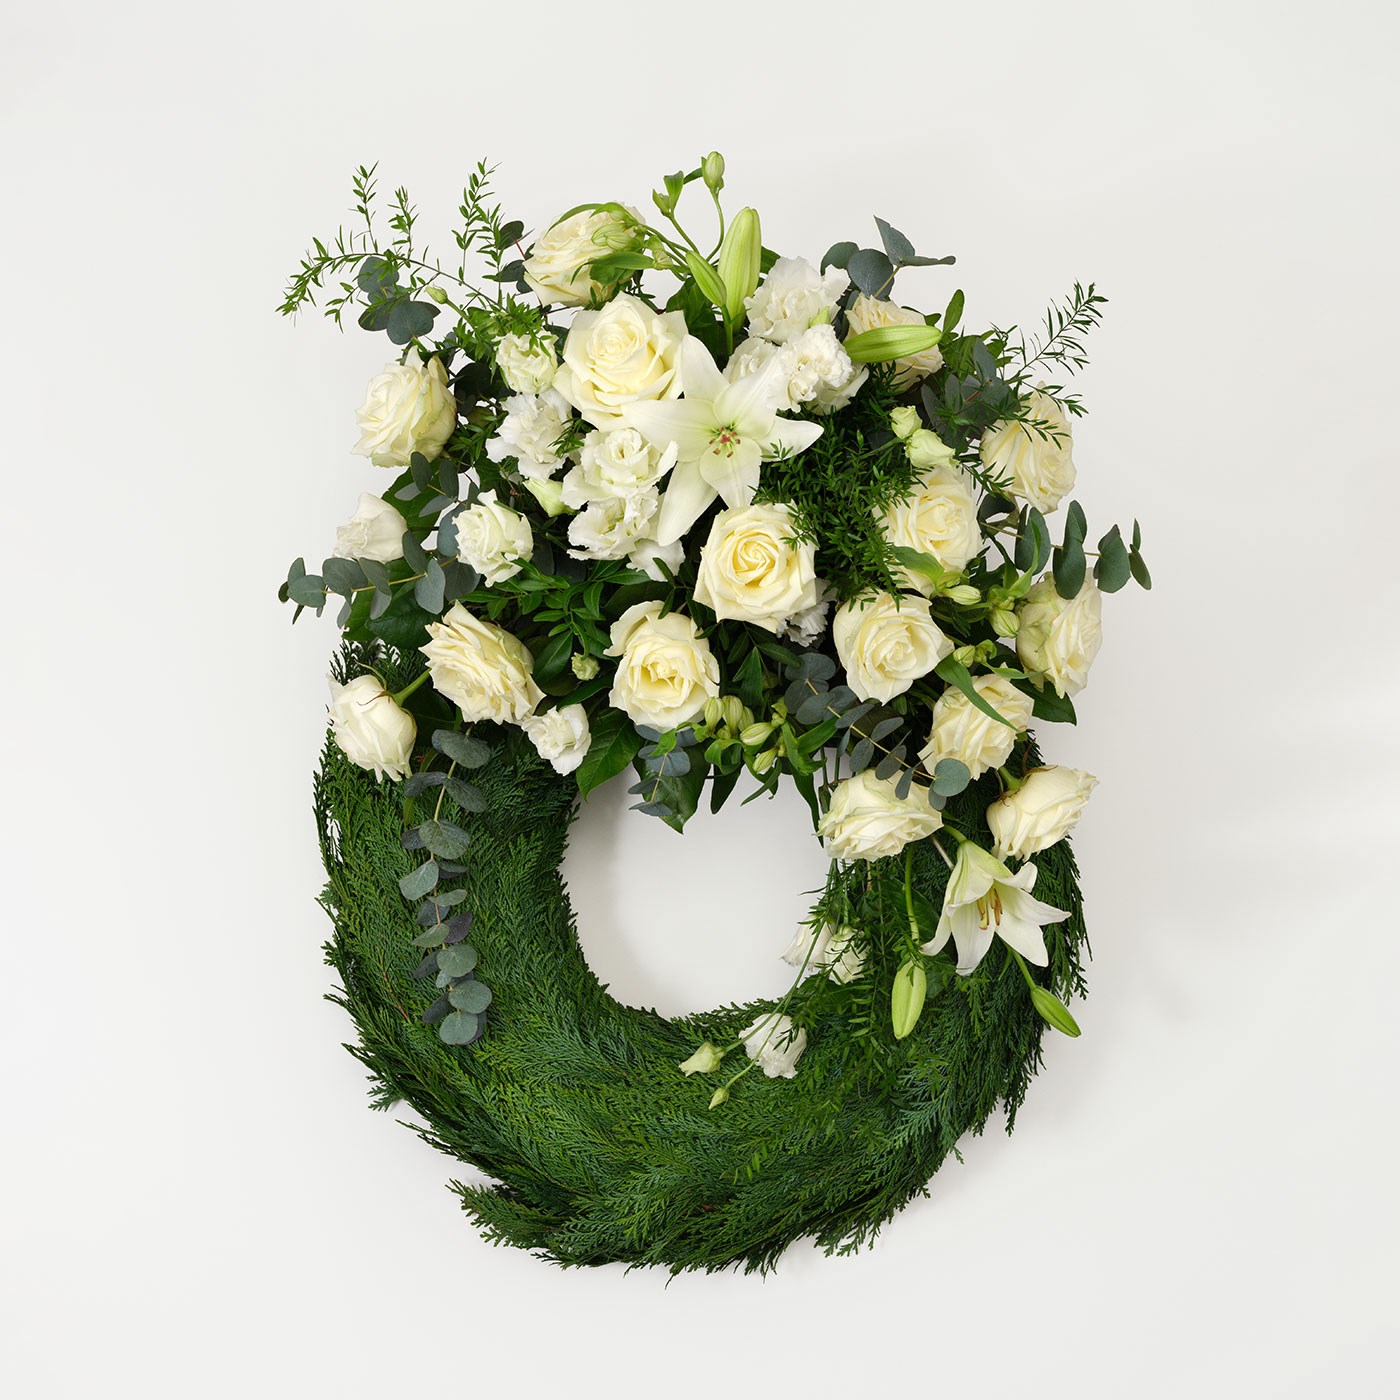 Funeral wreath traditional style